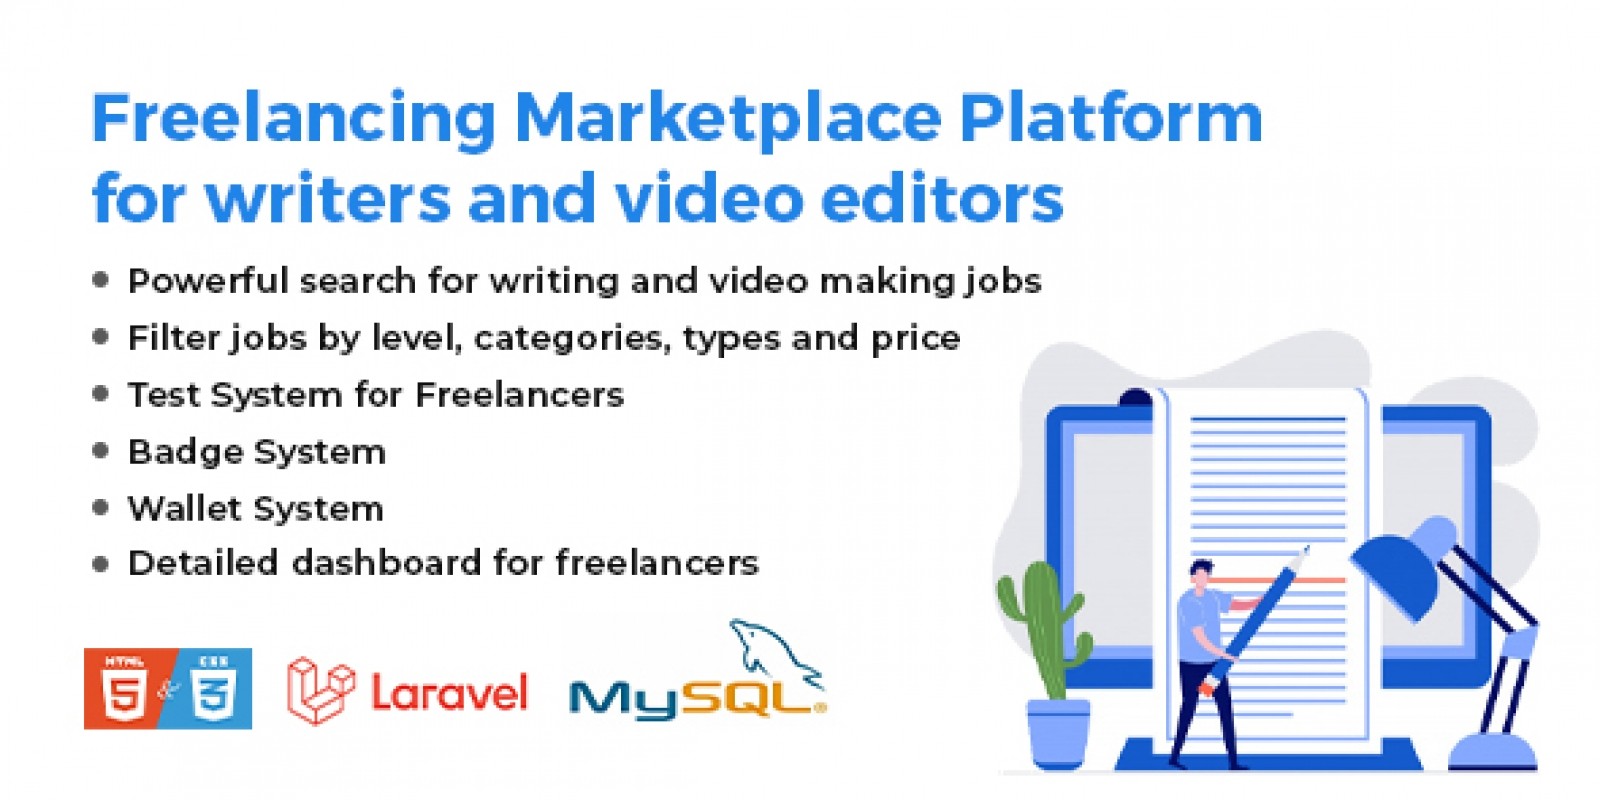 Resell Content - Freelancing Platform for Writers